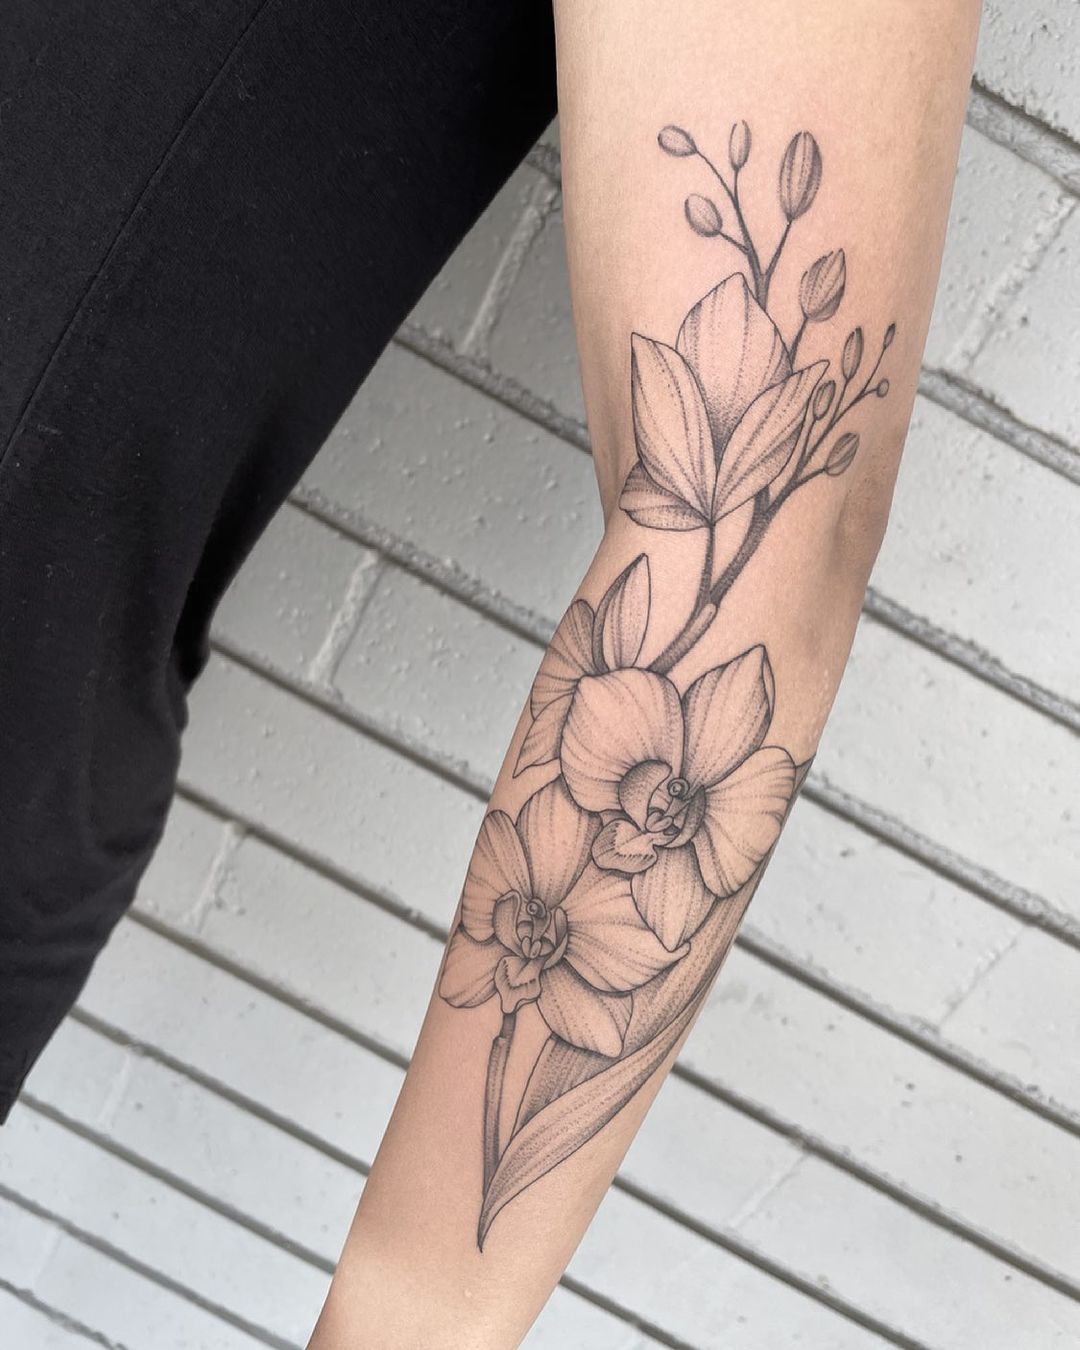 30+ Orchid Tattoos: Top Ideas & Designs, Symbolism, Meaning - 100 Tattoos